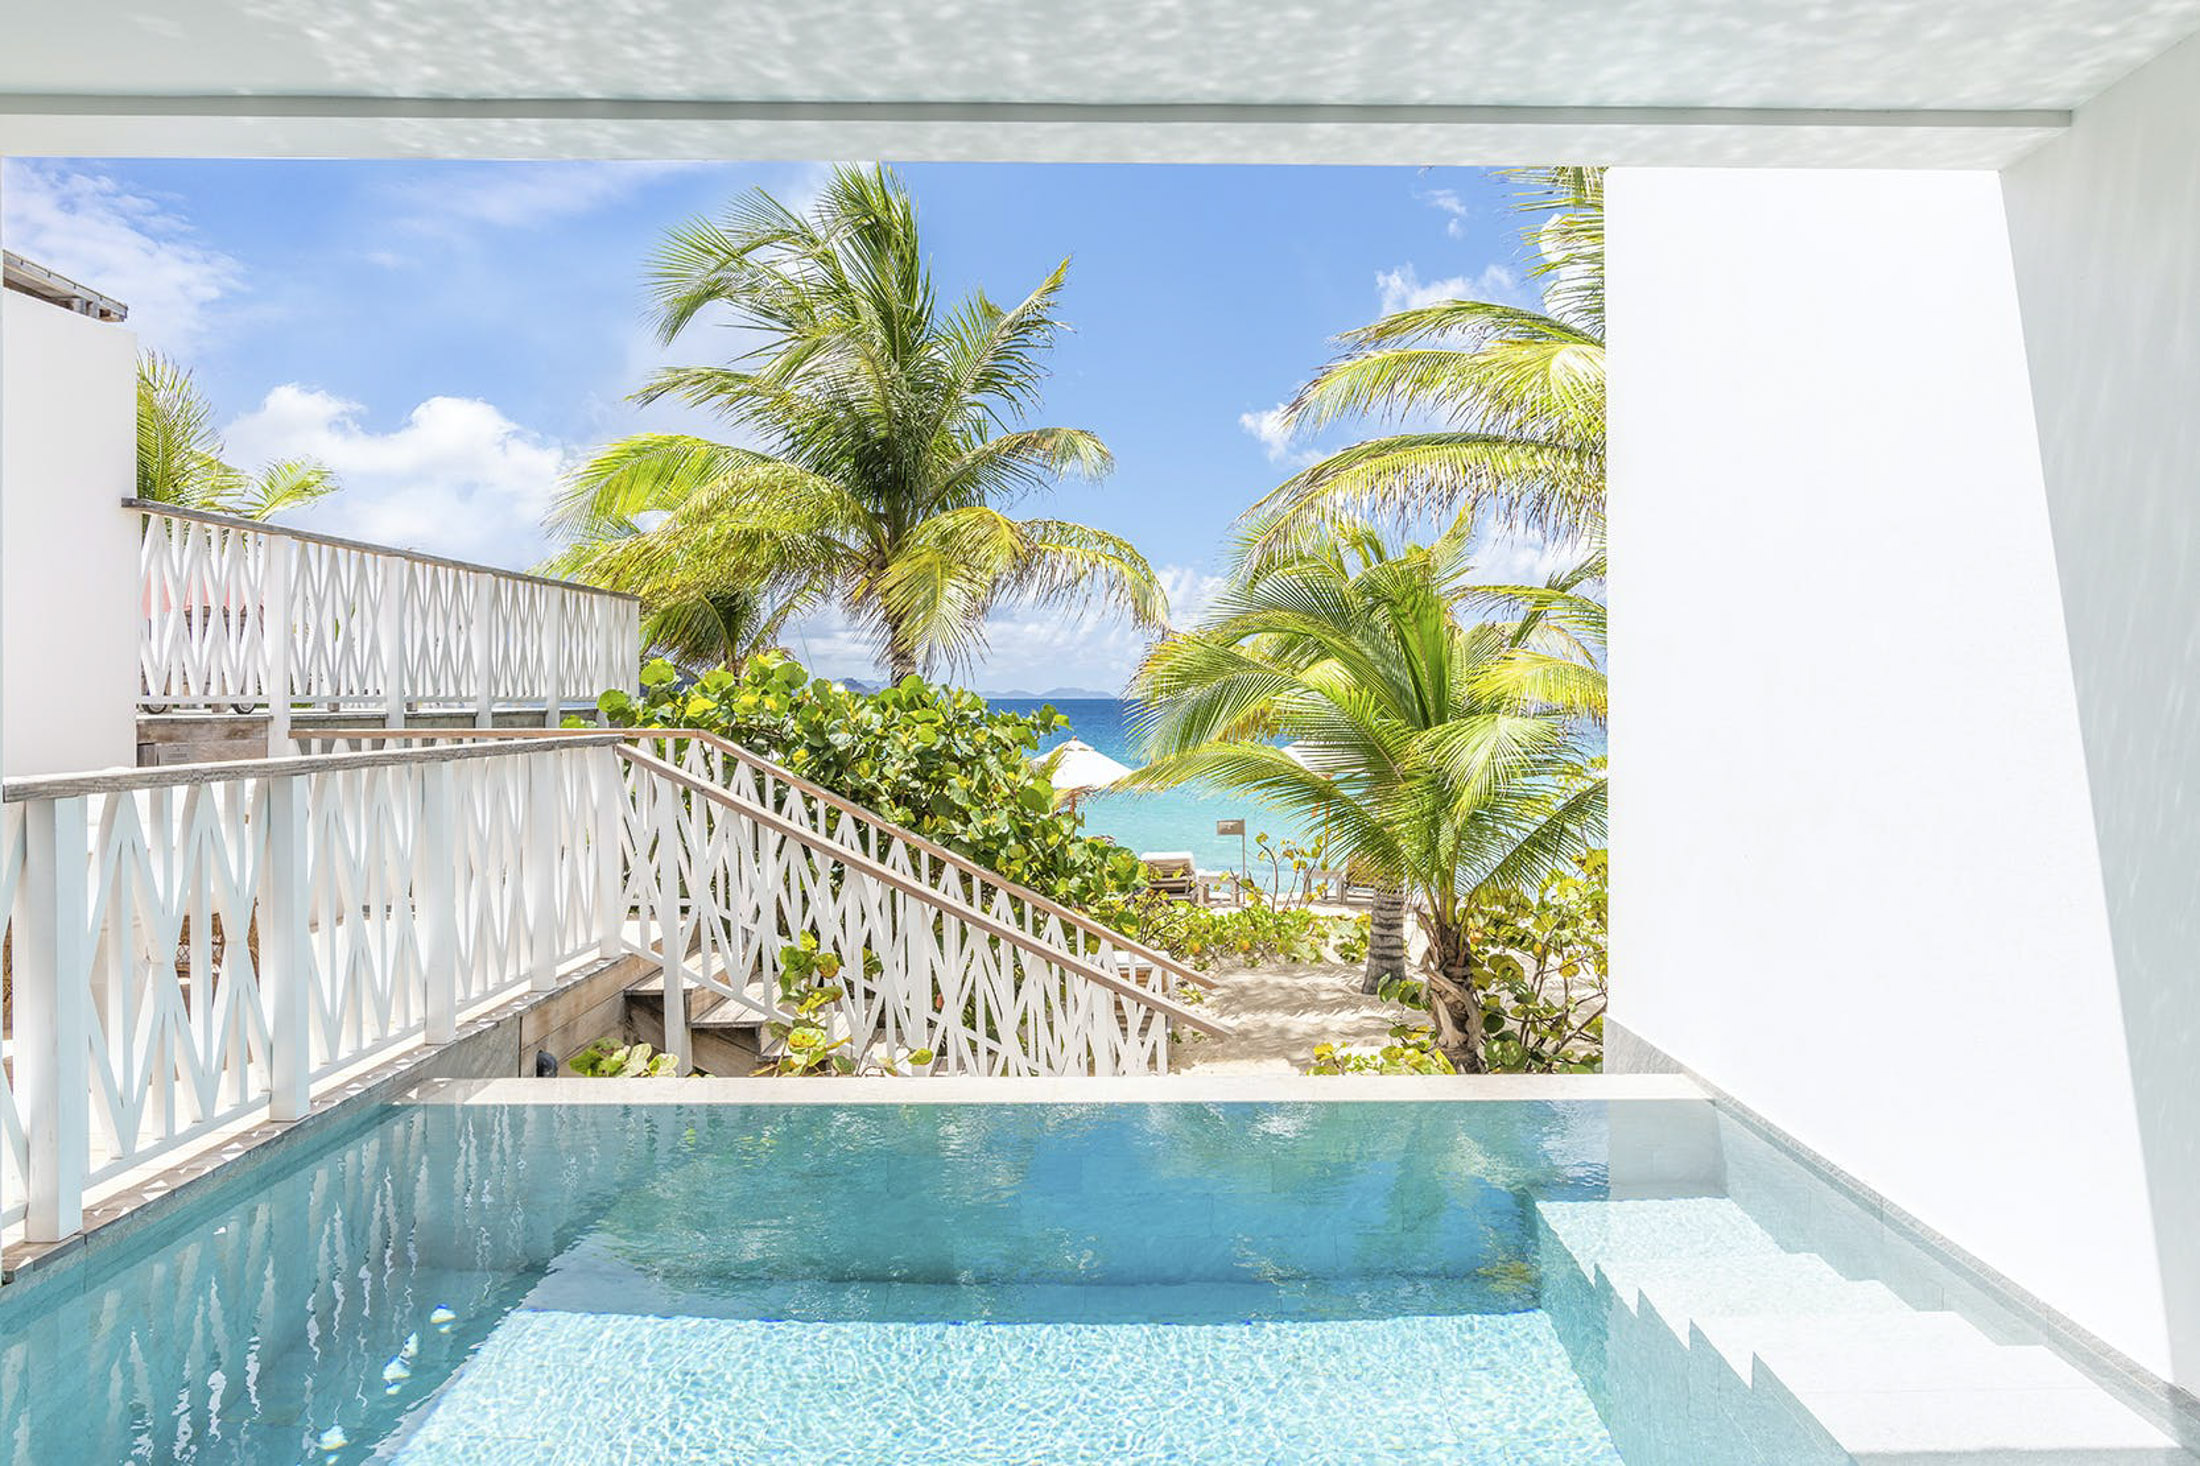 6 Secret Hotel Villas You Have To Know About to Book - Bloomberg